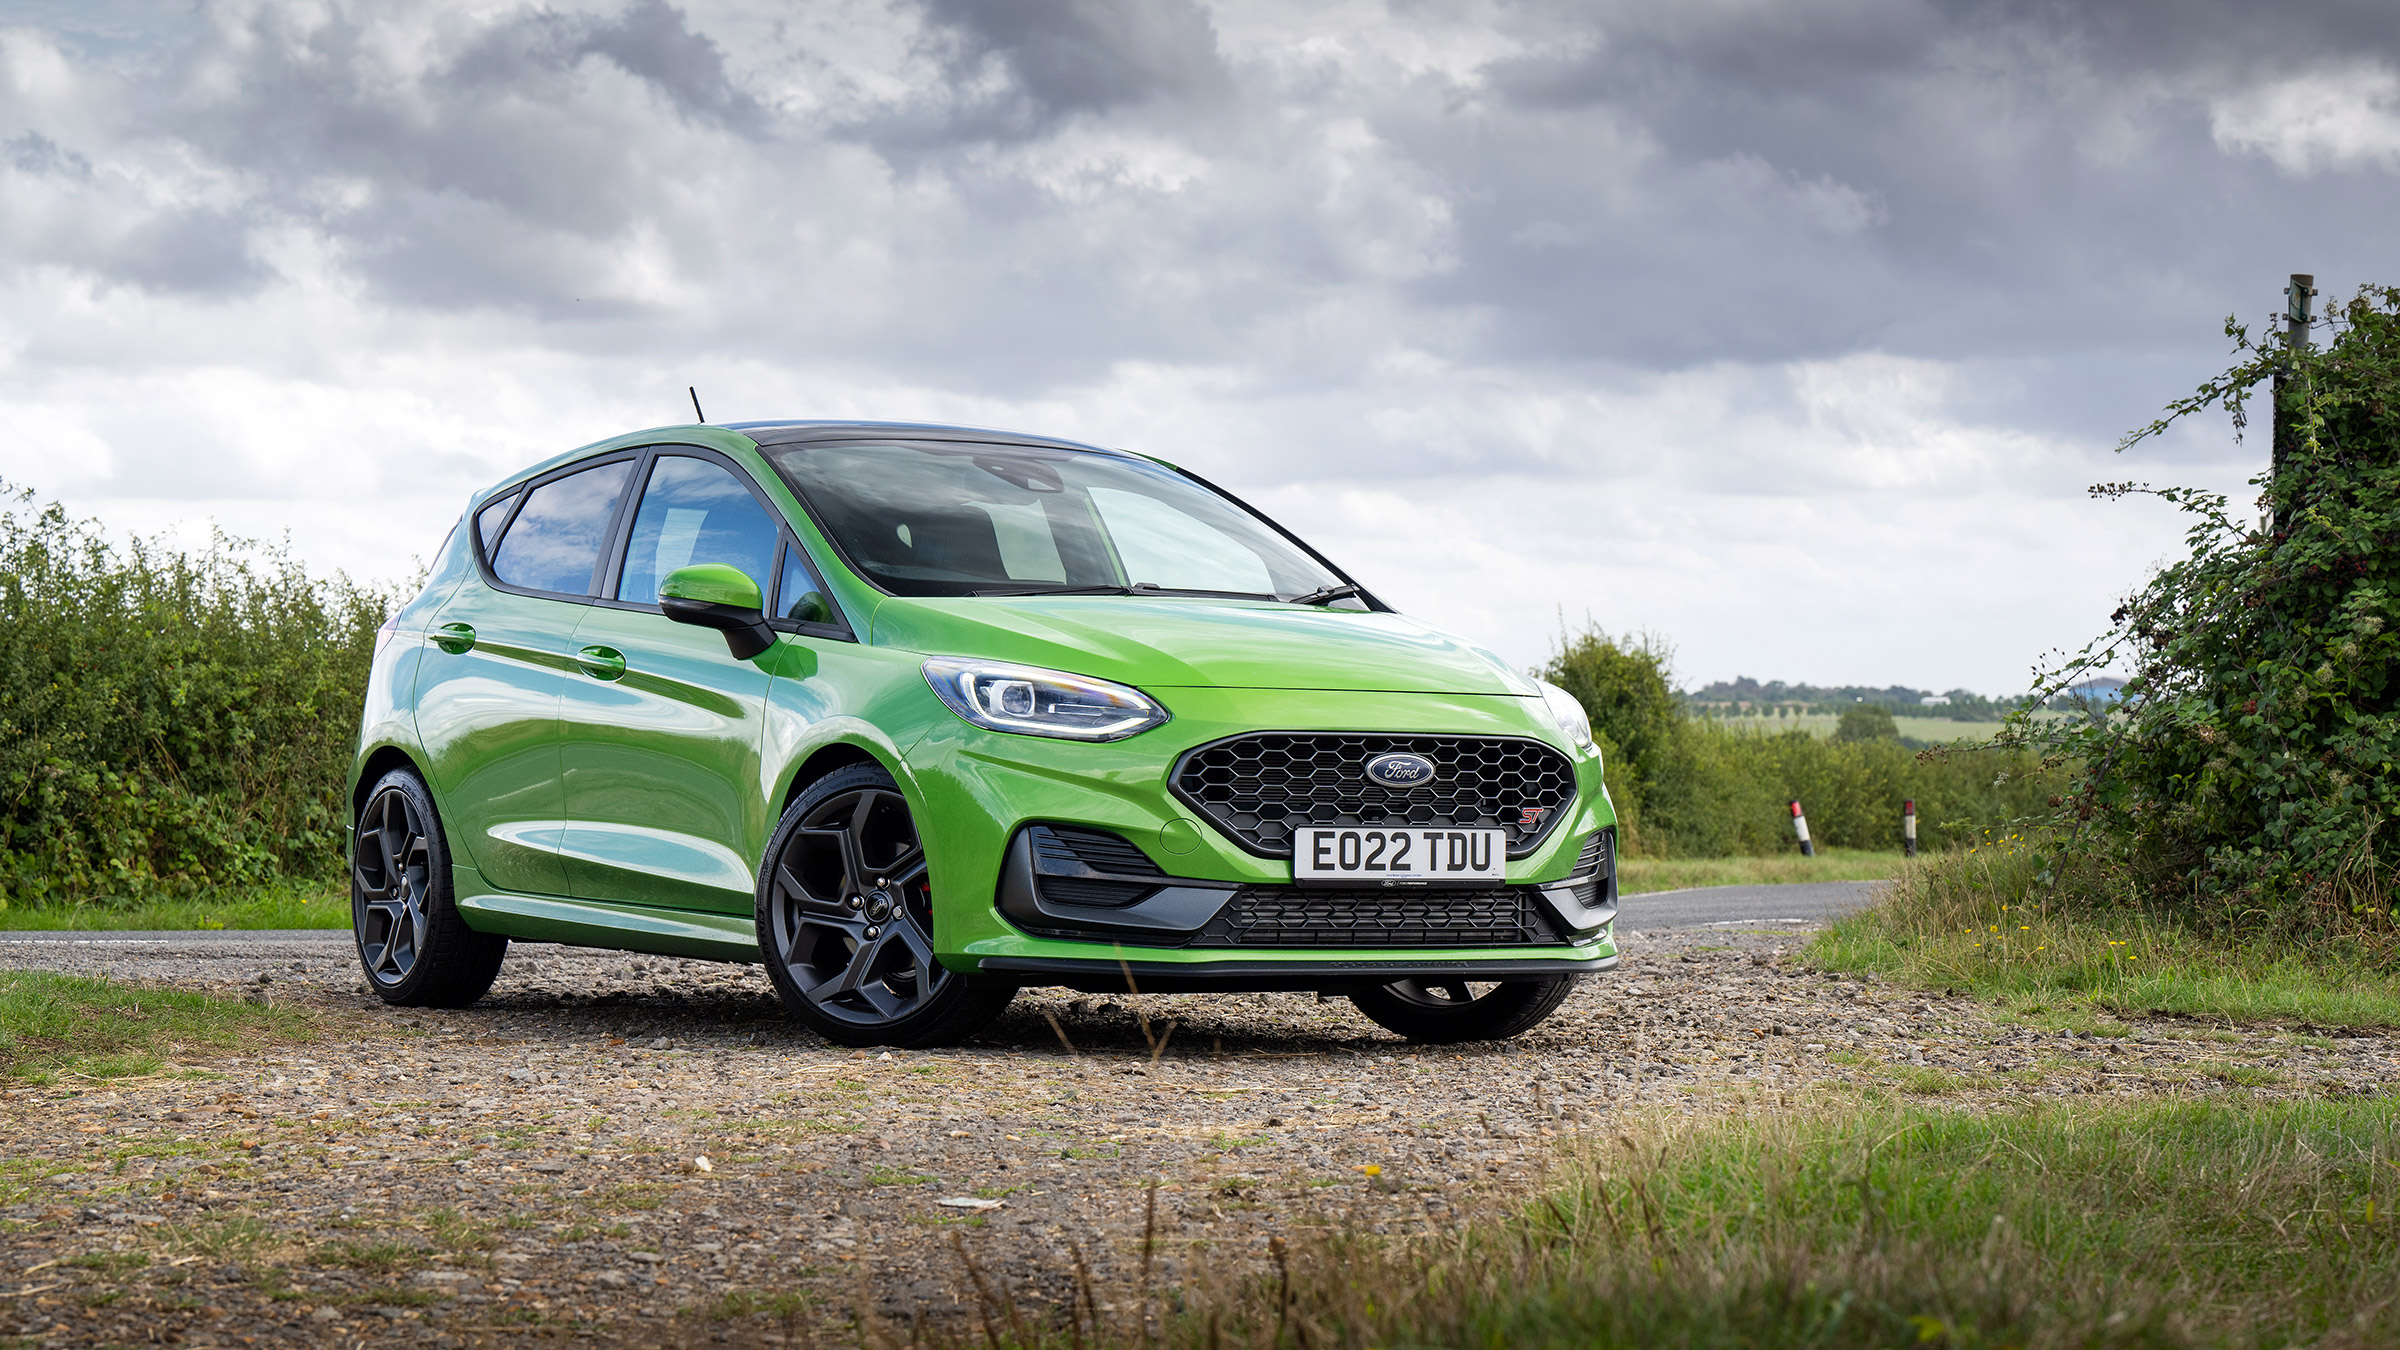 Ford Fiesta ST review – refreshed and ready to take on the Hyundai